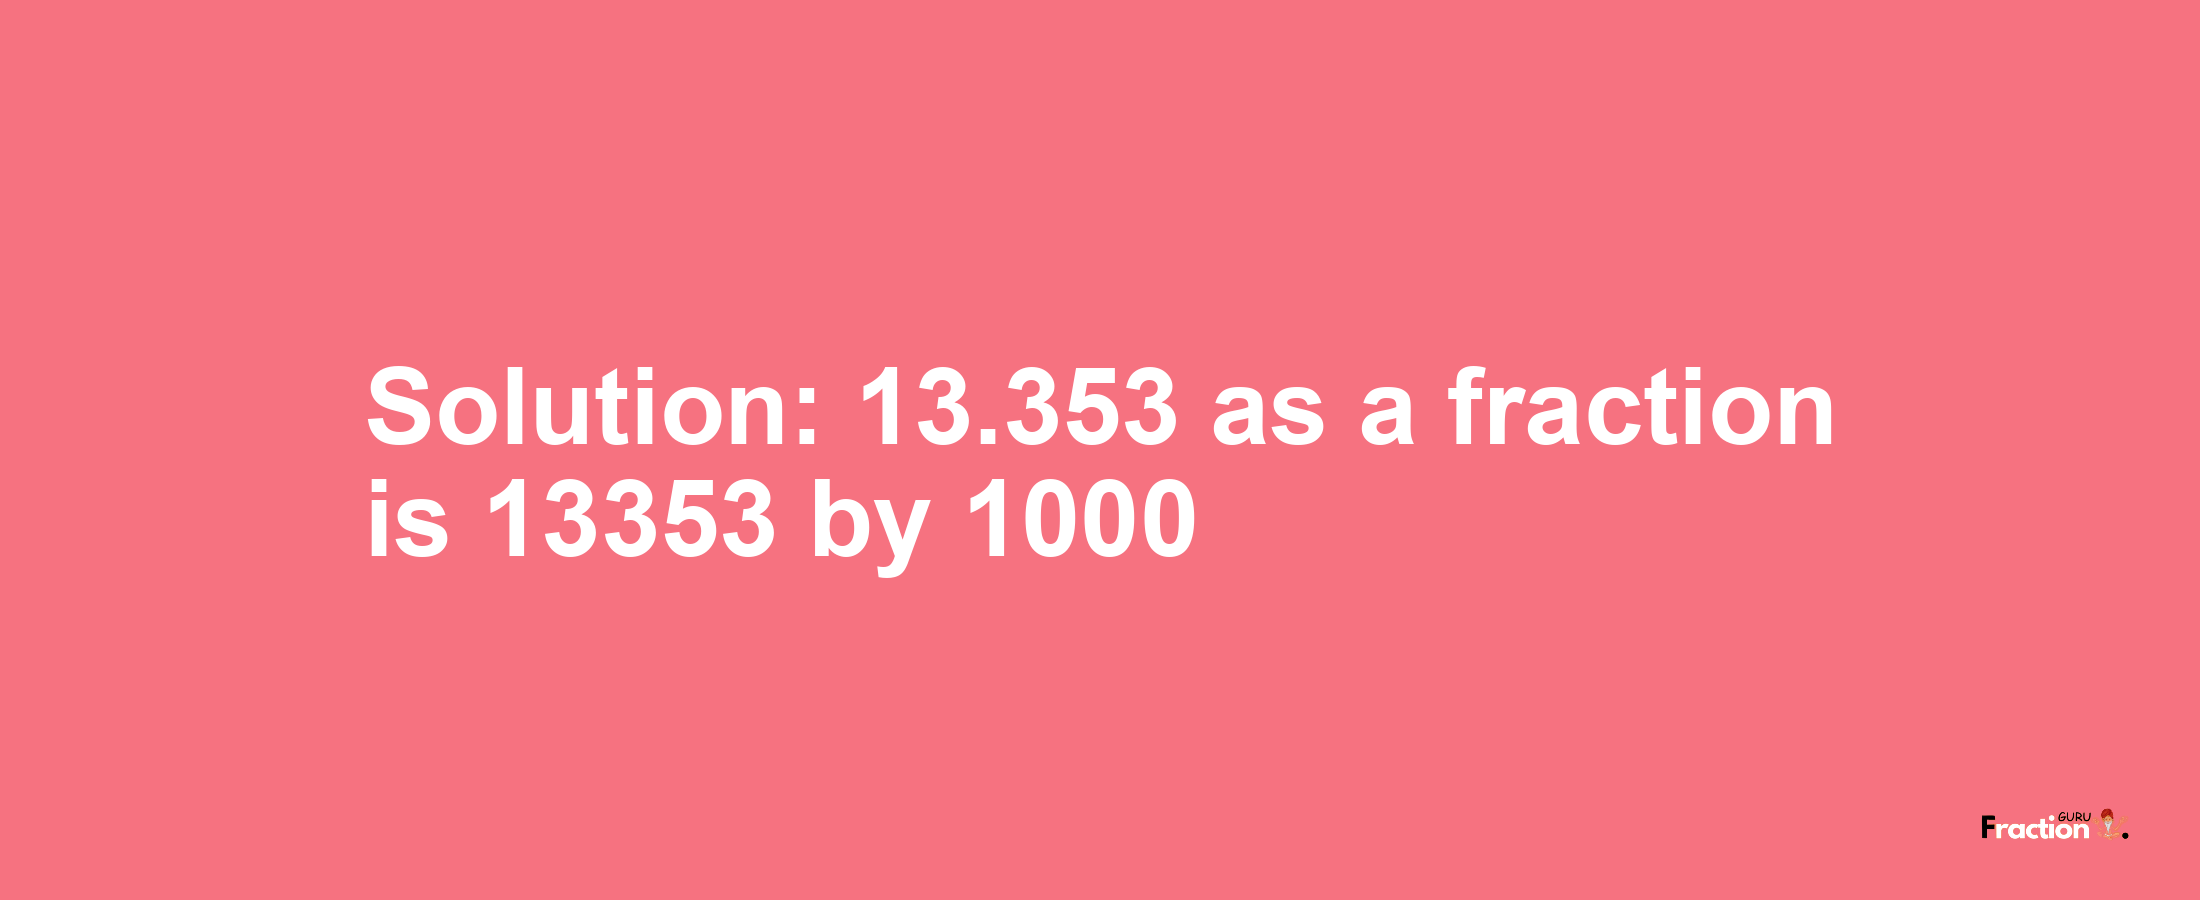 Solution:13.353 as a fraction is 13353/1000